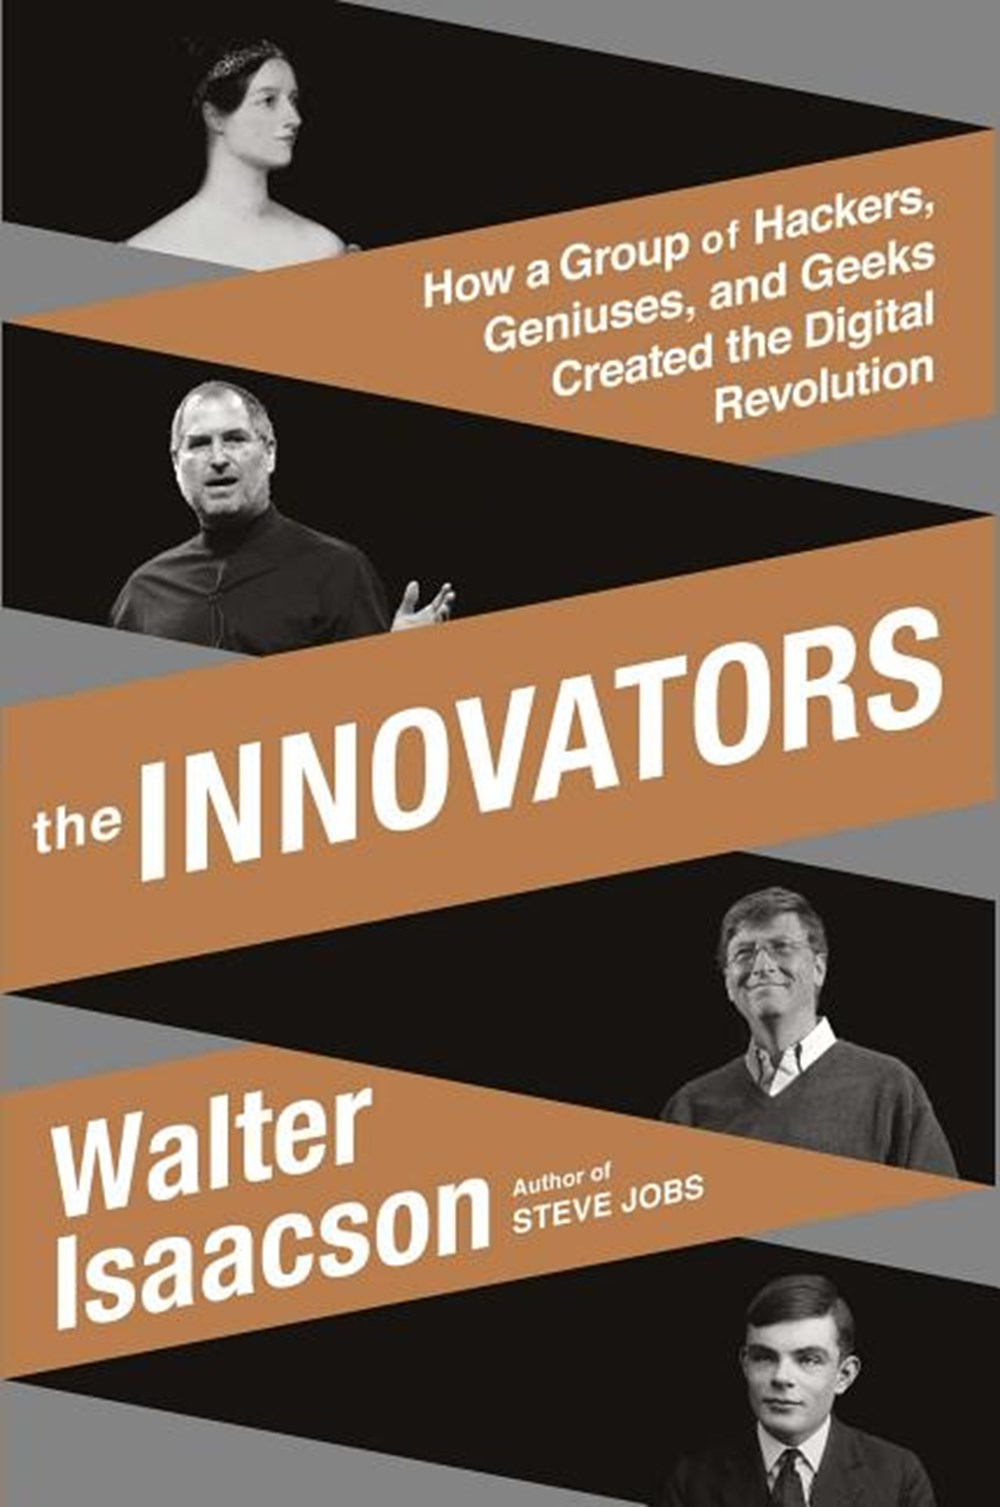 Innovators How a Group of Hackers, Geniuses, and Geeks Created the Digital Revolution